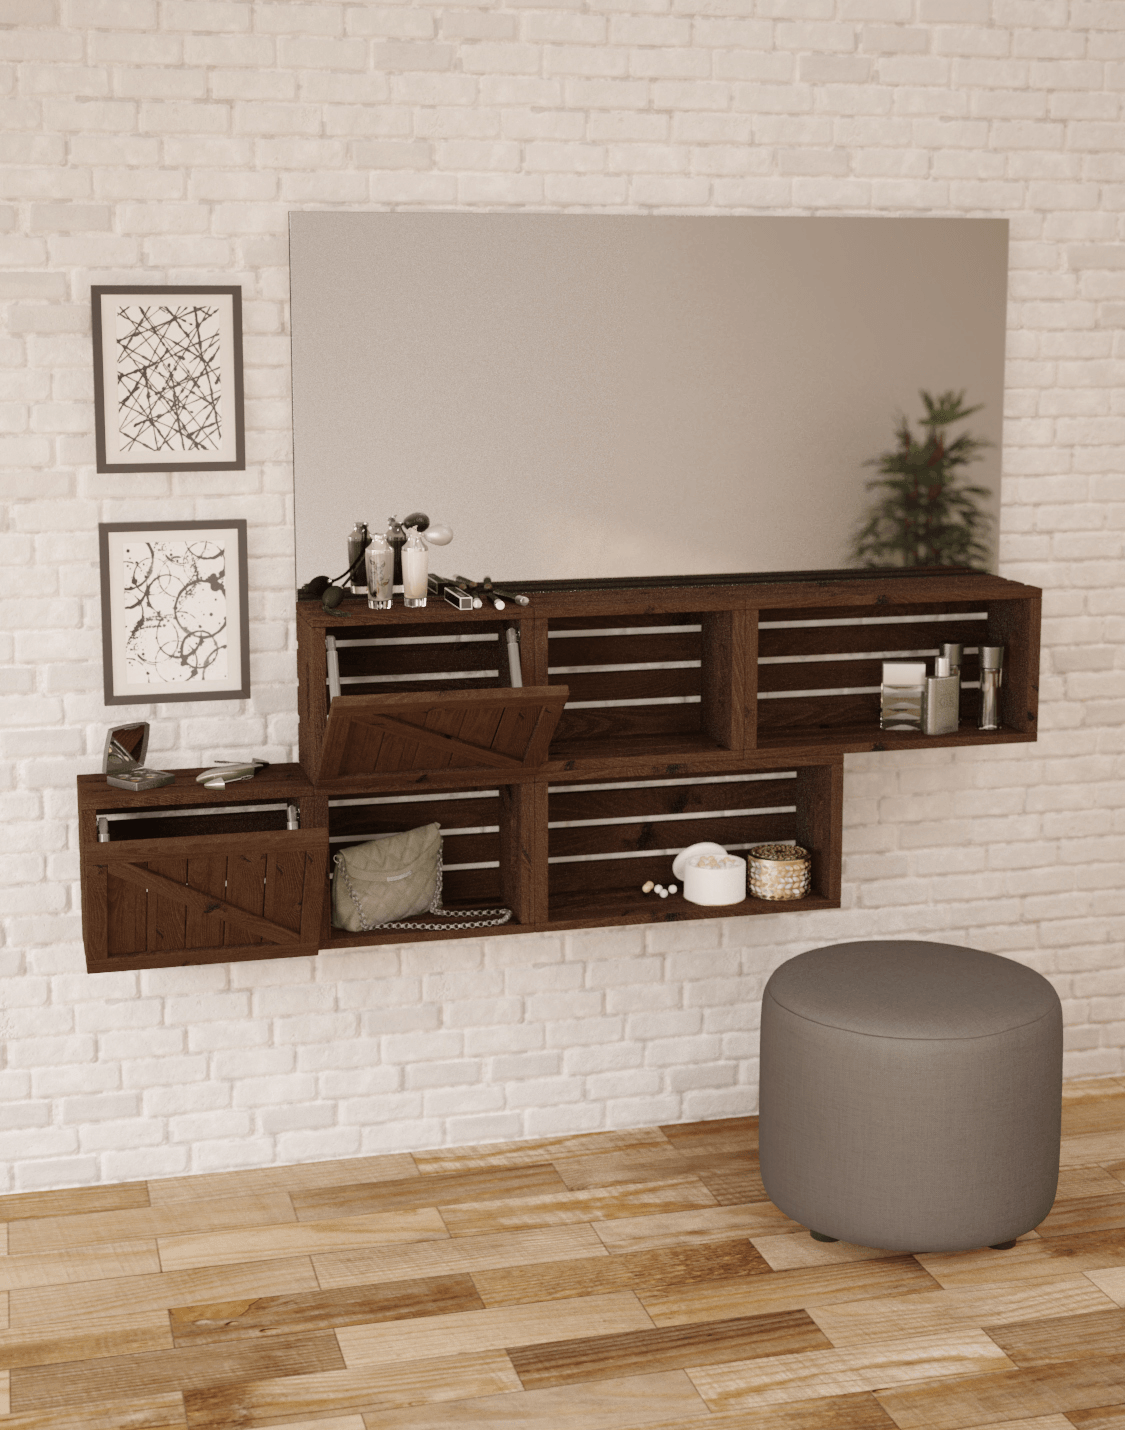 Stella Dresser Modular And real wood furniture product